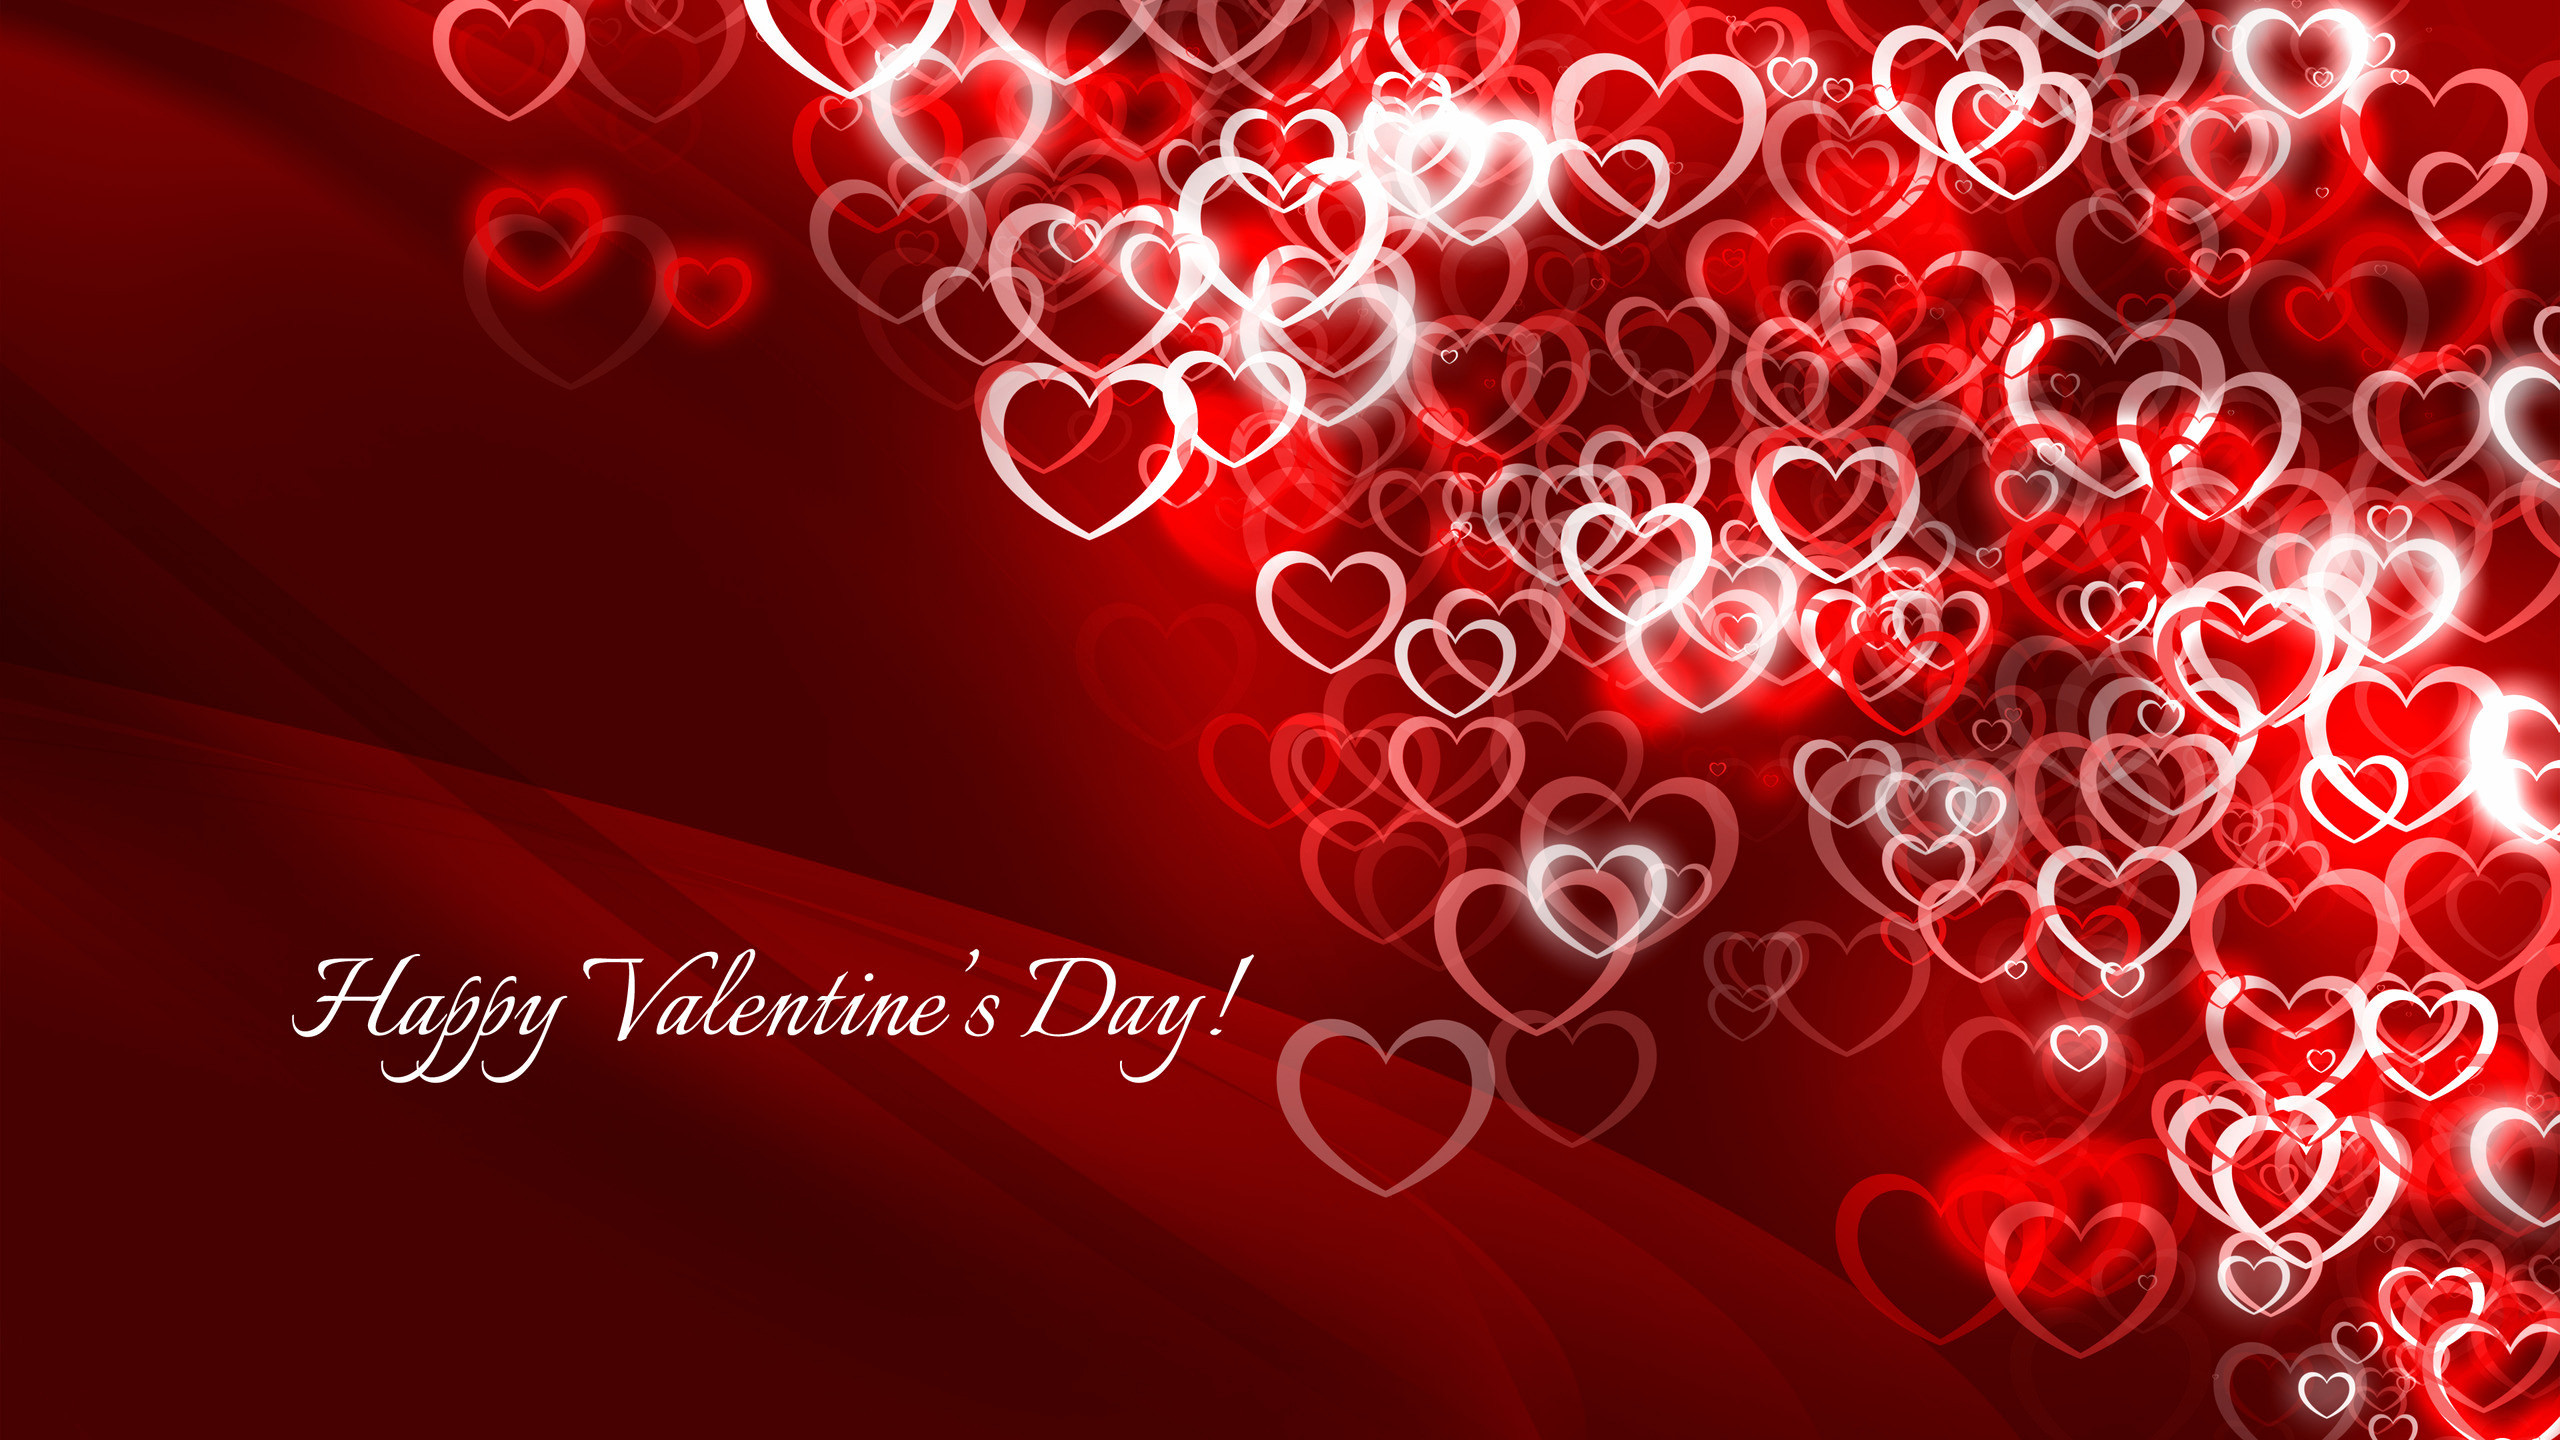 2560x1440, Beautiful Valentine Wallpapers Fresh Valentine - Valentines Day Images 2019 Hd - HD Wallpaper 